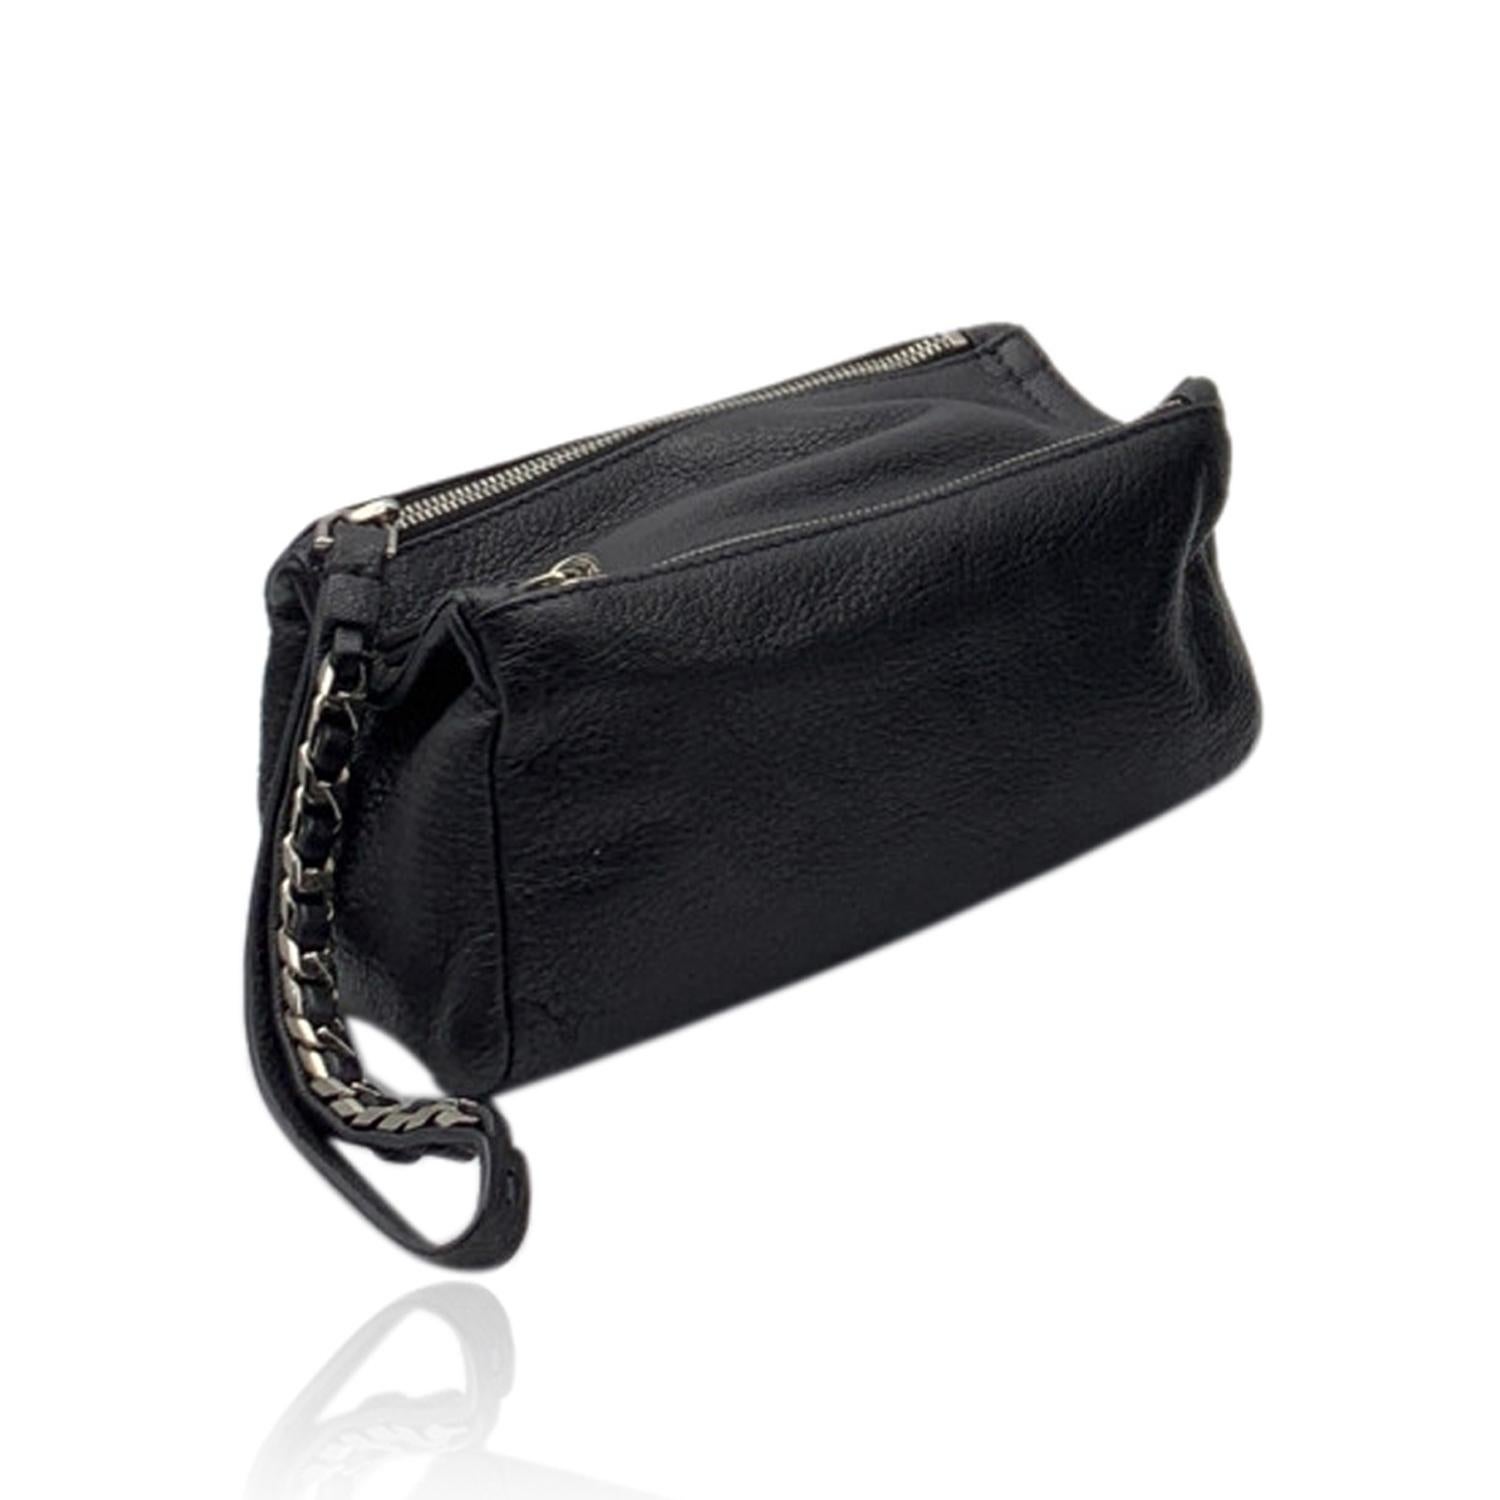 Givenchy 'Pandora' pouch clutch bag. Black leather and silver metal hardware. Chain and leather wrist strap. 2 compartments with upper zipper closure. Silver metal logo lettering on top. Black canvas lining. 'Givenchy - Made in Italy' tag